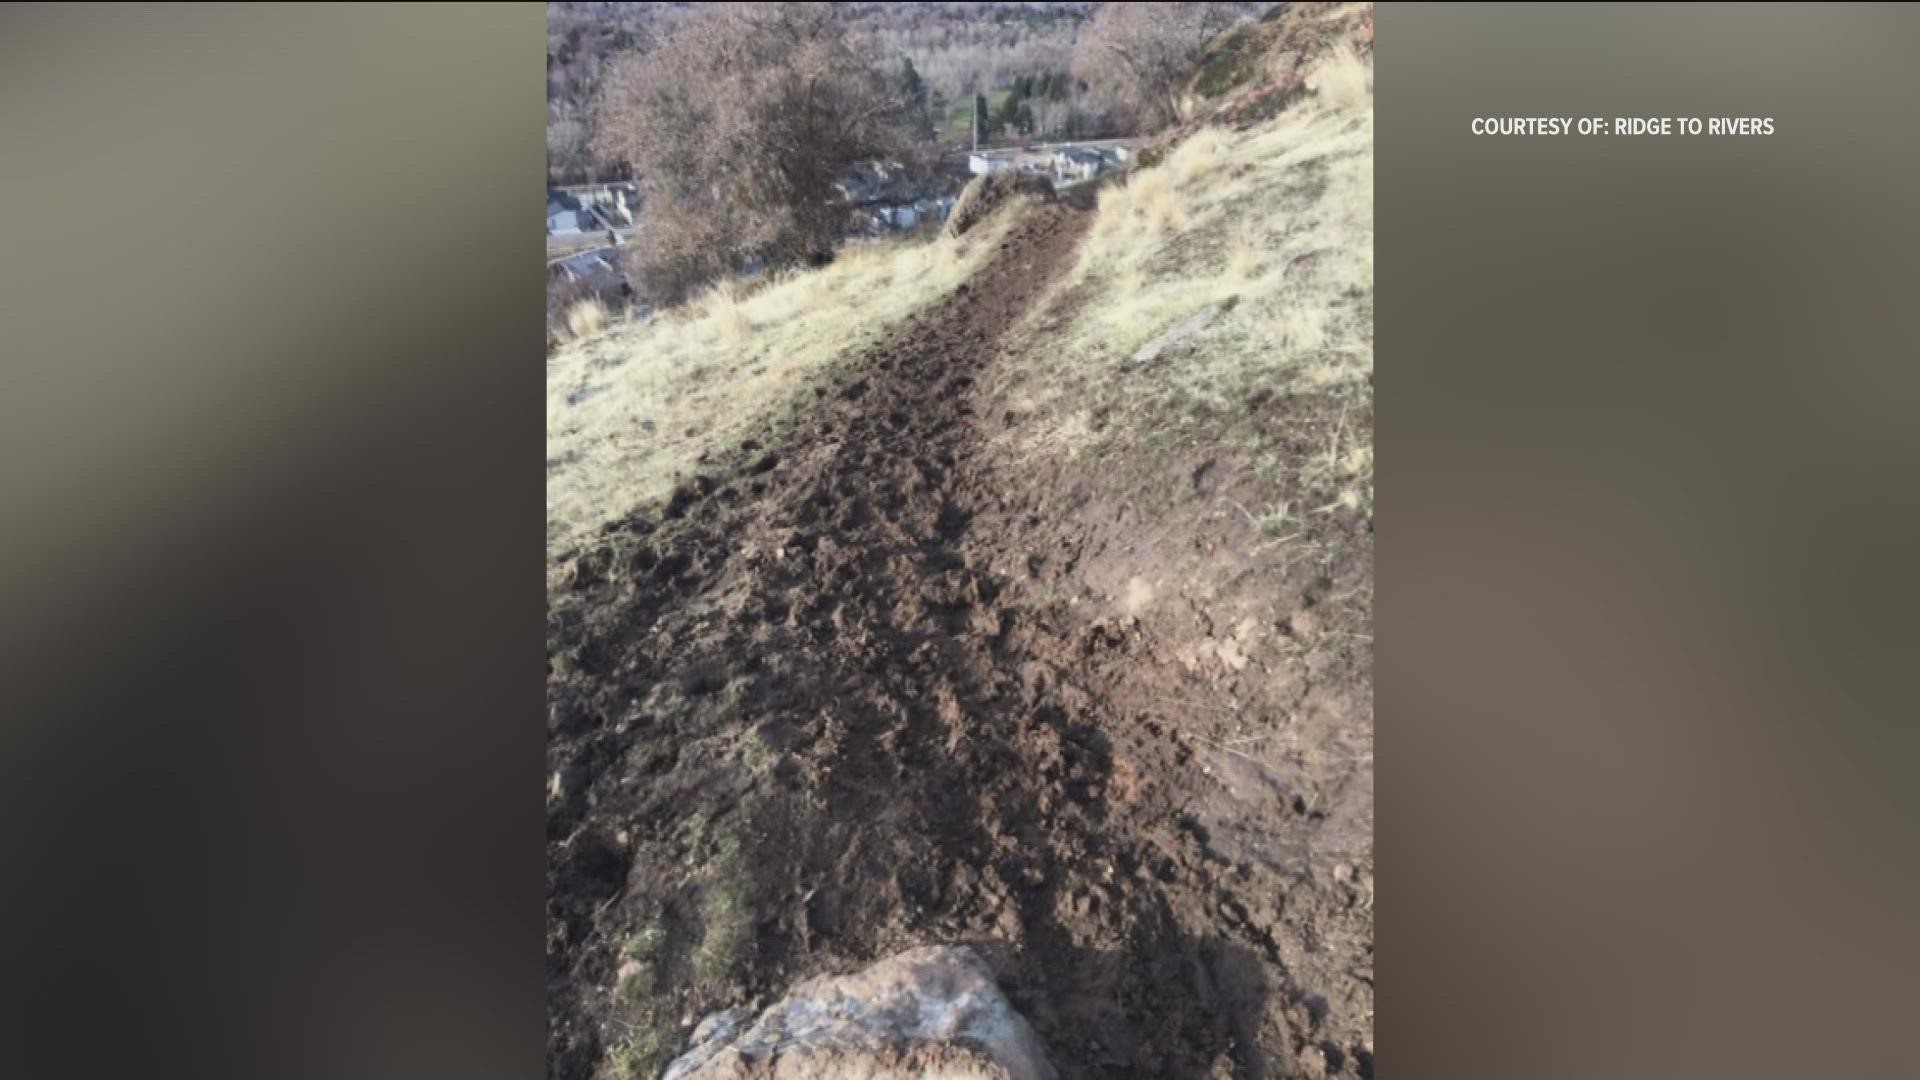 Ridge to Rivers said foot traffic on trails such as Hippy Shake, Tram and Heroes in the Boise Foothills could create "irreparable conditions come springtime."